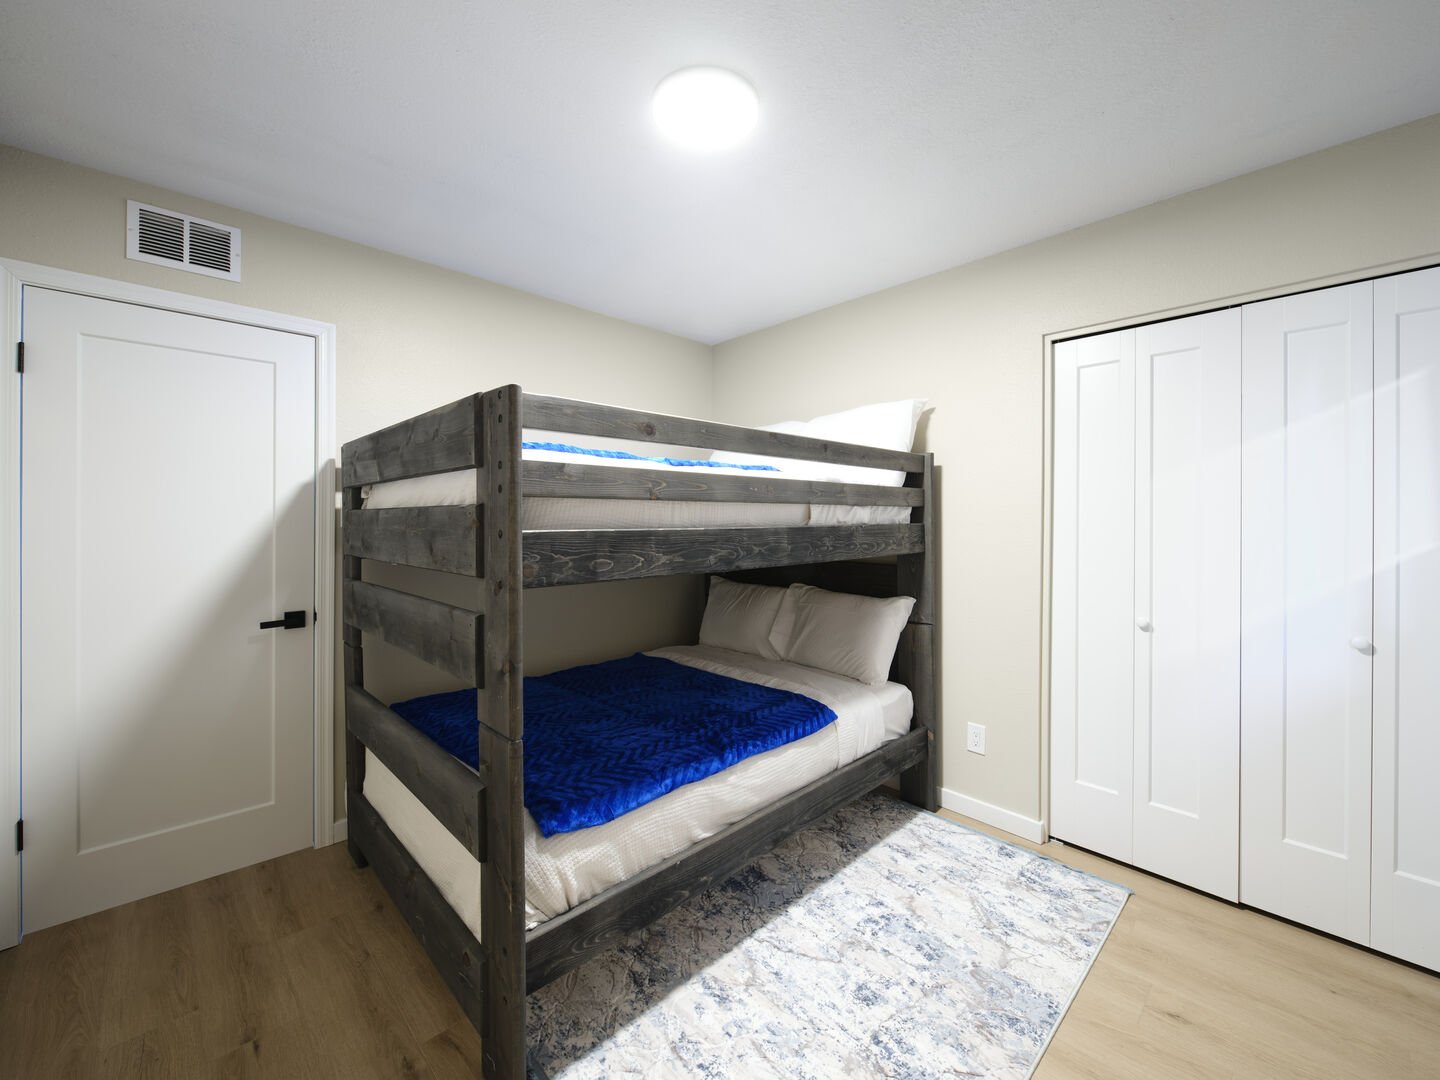 5th bedroom with full sized bunk beds